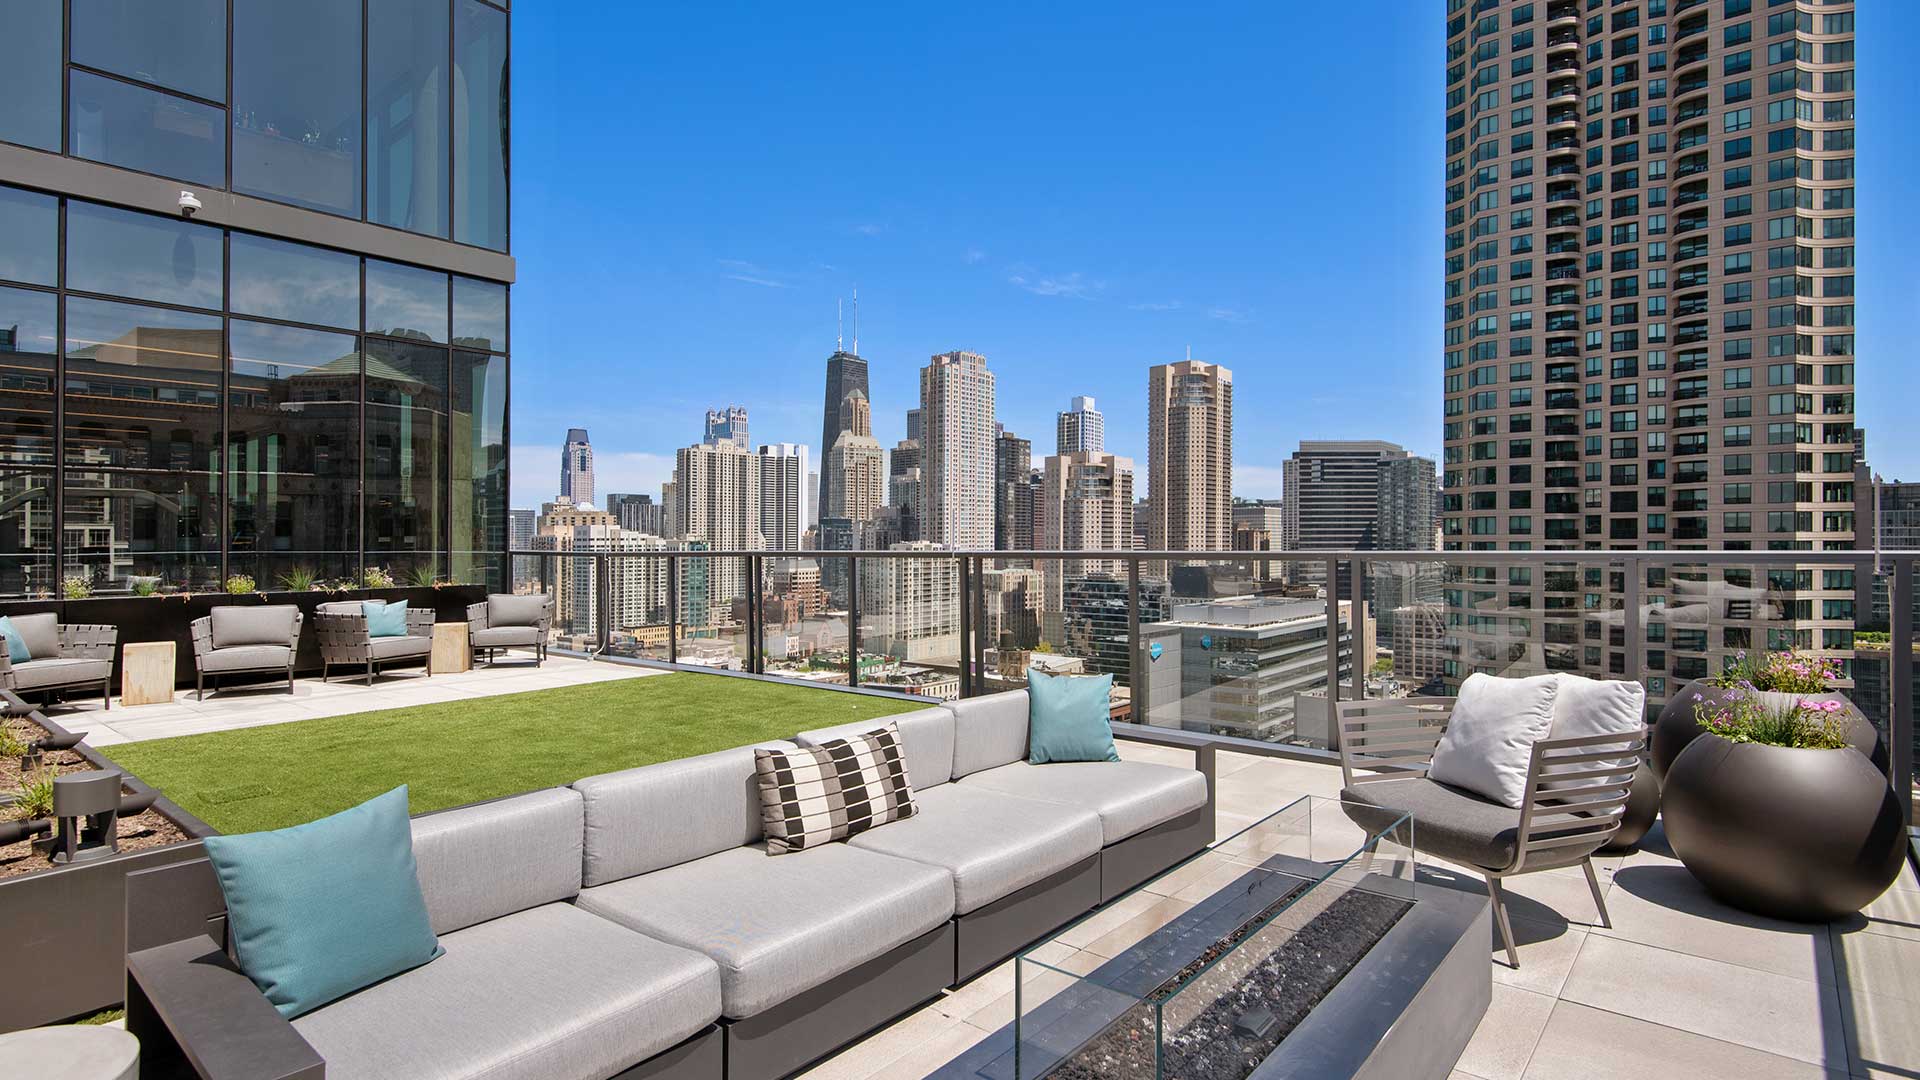 An outdoor couch and fireplace are in the foreground. Behind is a turf area for playing outdoor games and additional seating. Beyond the deck is the Chicago skyline on a clear day.